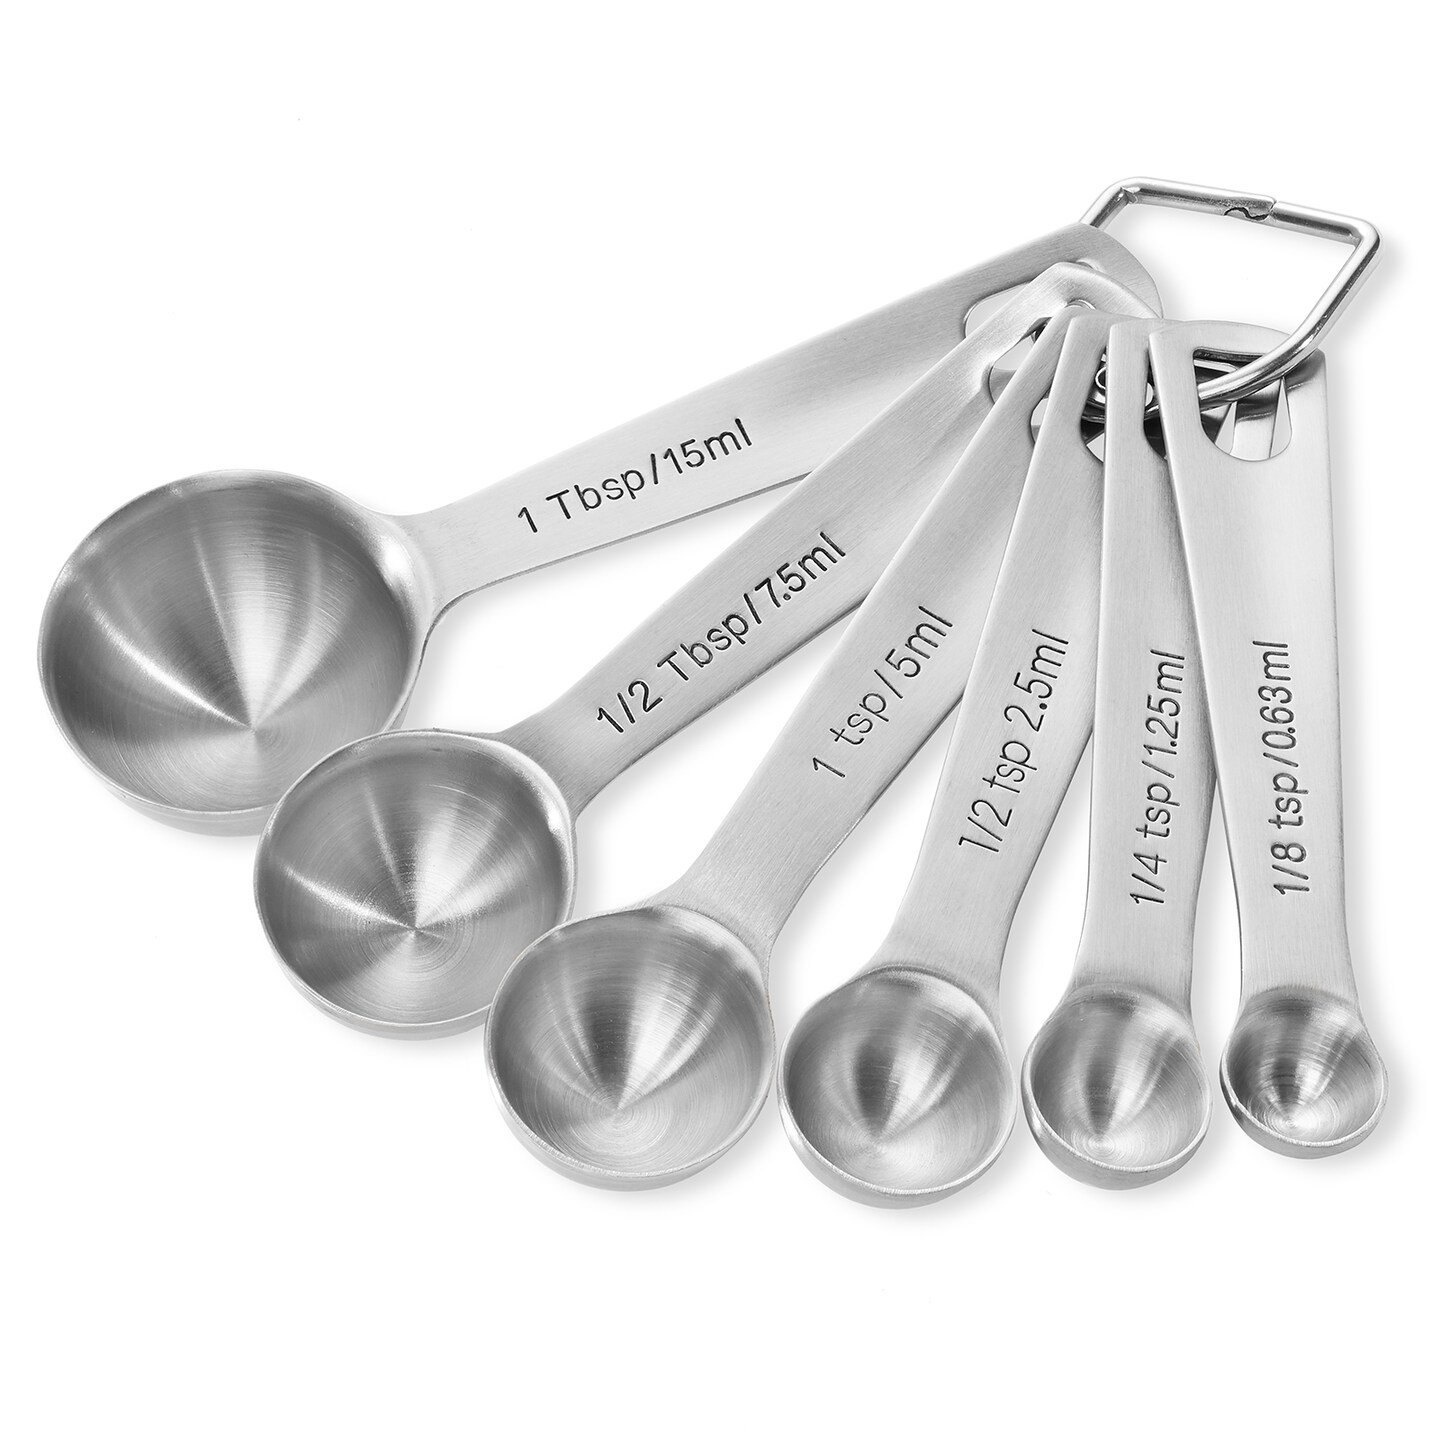 Stainless Steel Measuring Spoons with Metric Set of 6 